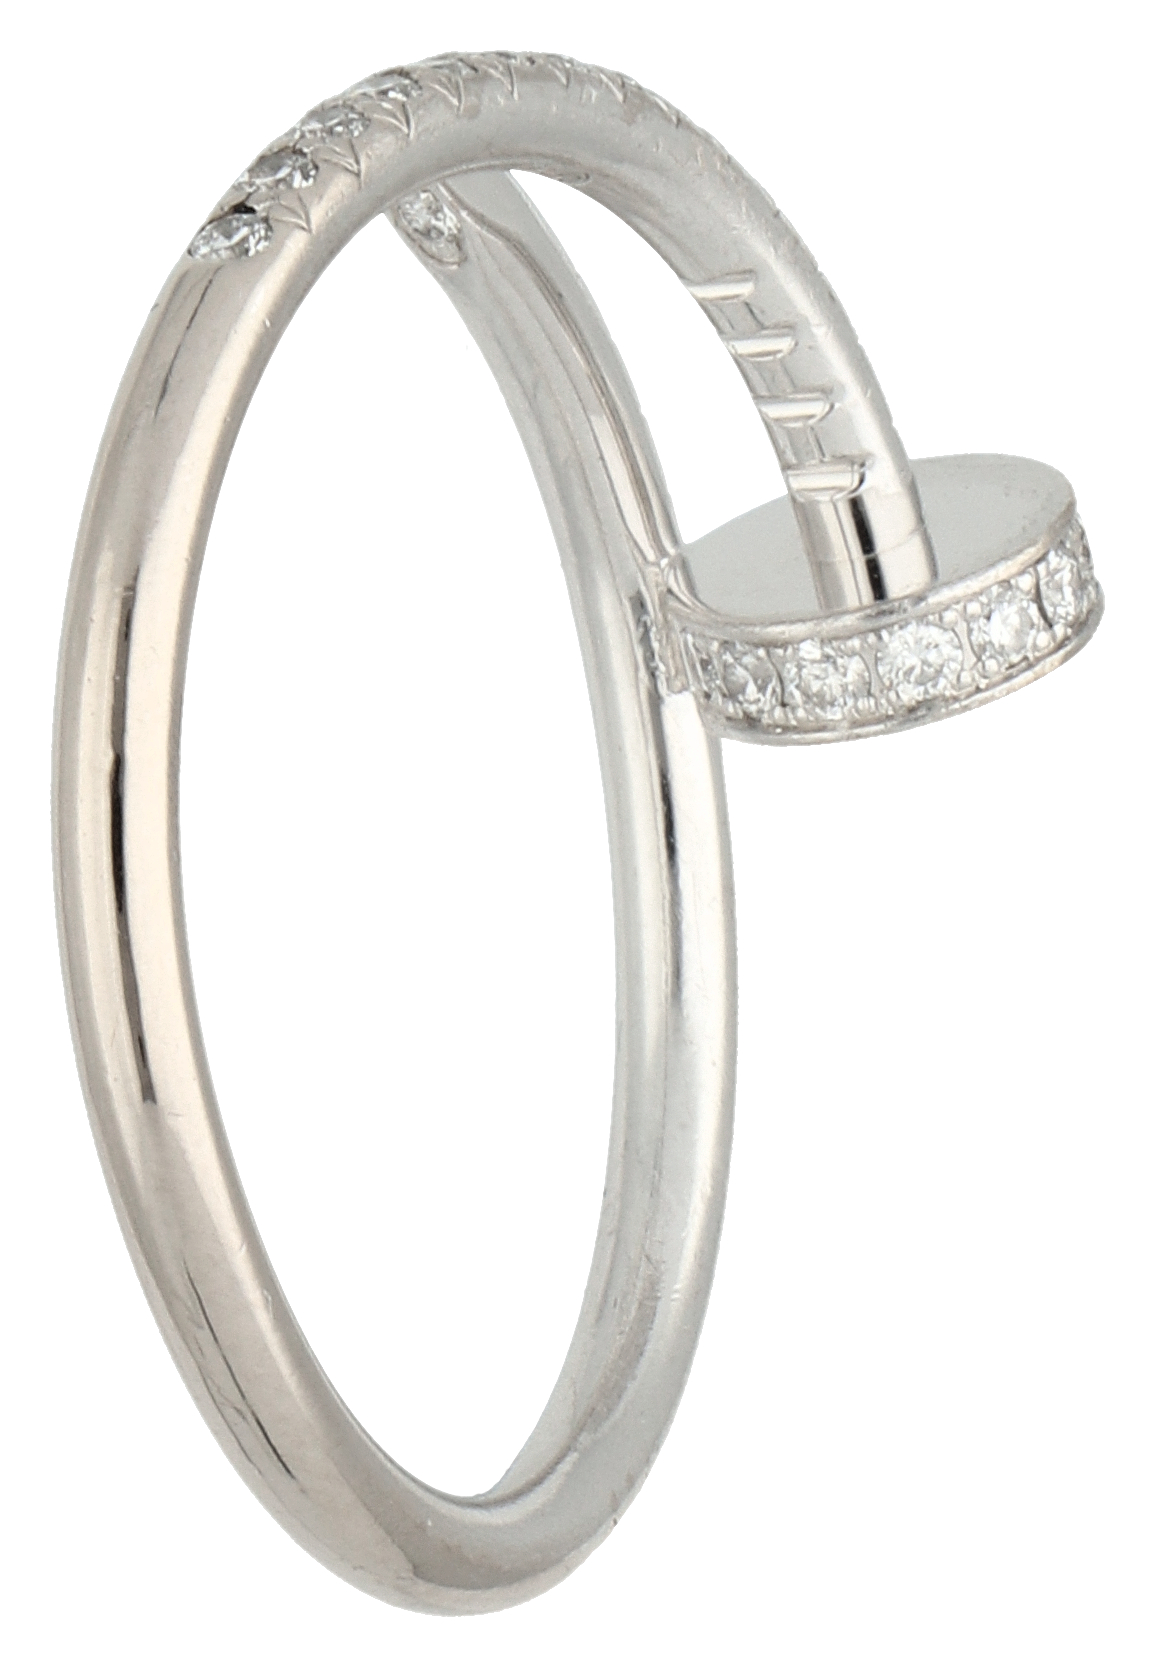 No Reserve - Cartier 18K white gold Juste un clou ring set with approx. 0.40 ct. diamond. - Image 2 of 6